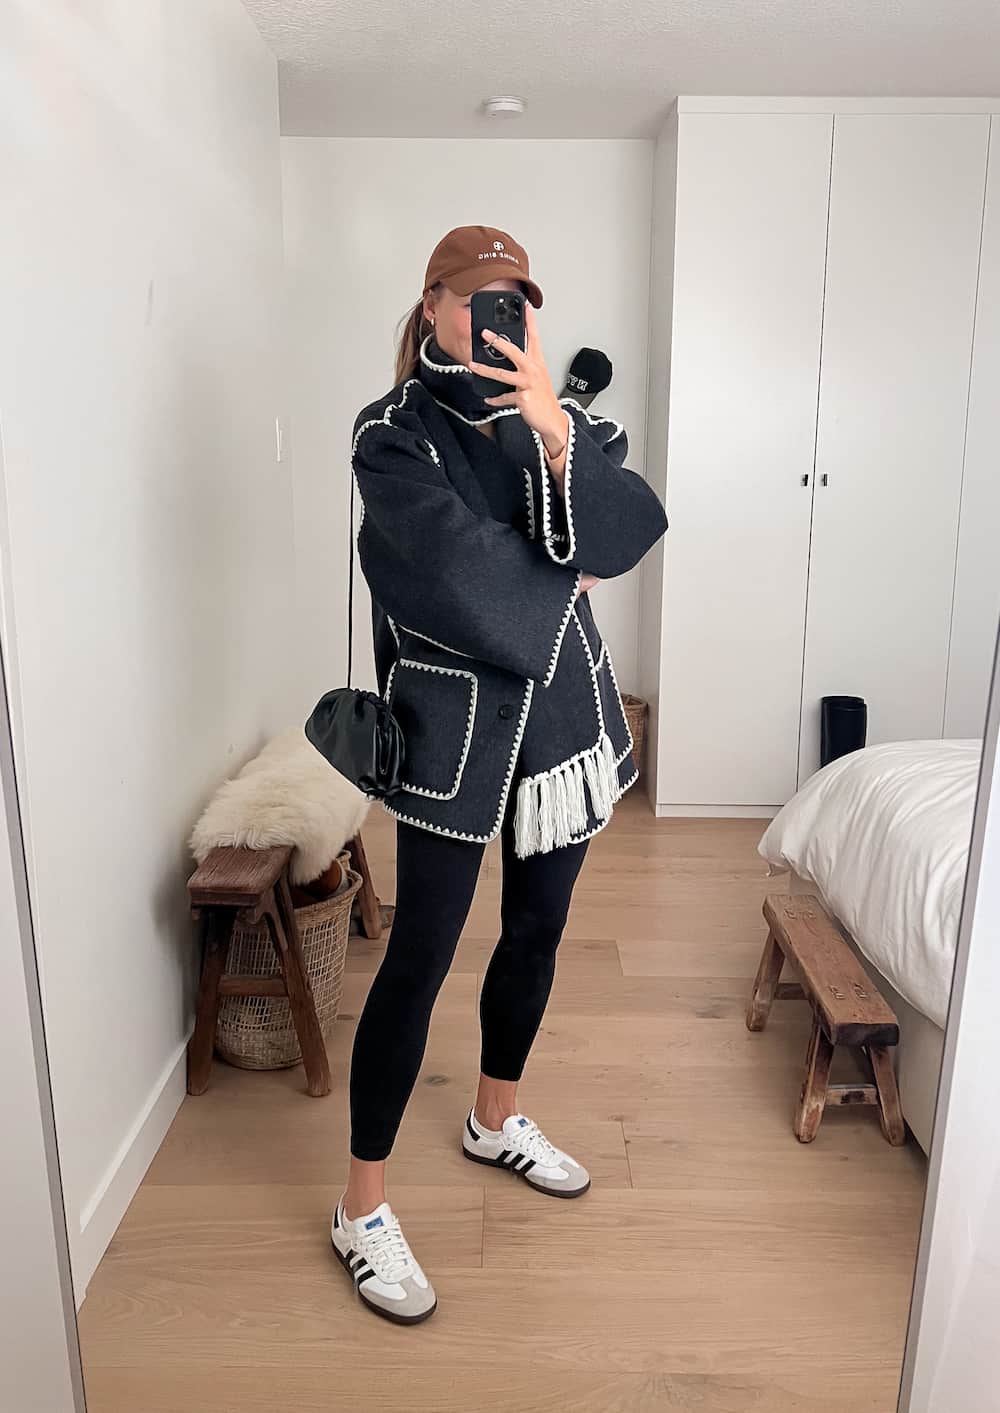 Woman wearing a dark grey oversized wool jacket with fringe and embroidery, black leggings, and white Adidas sneakers